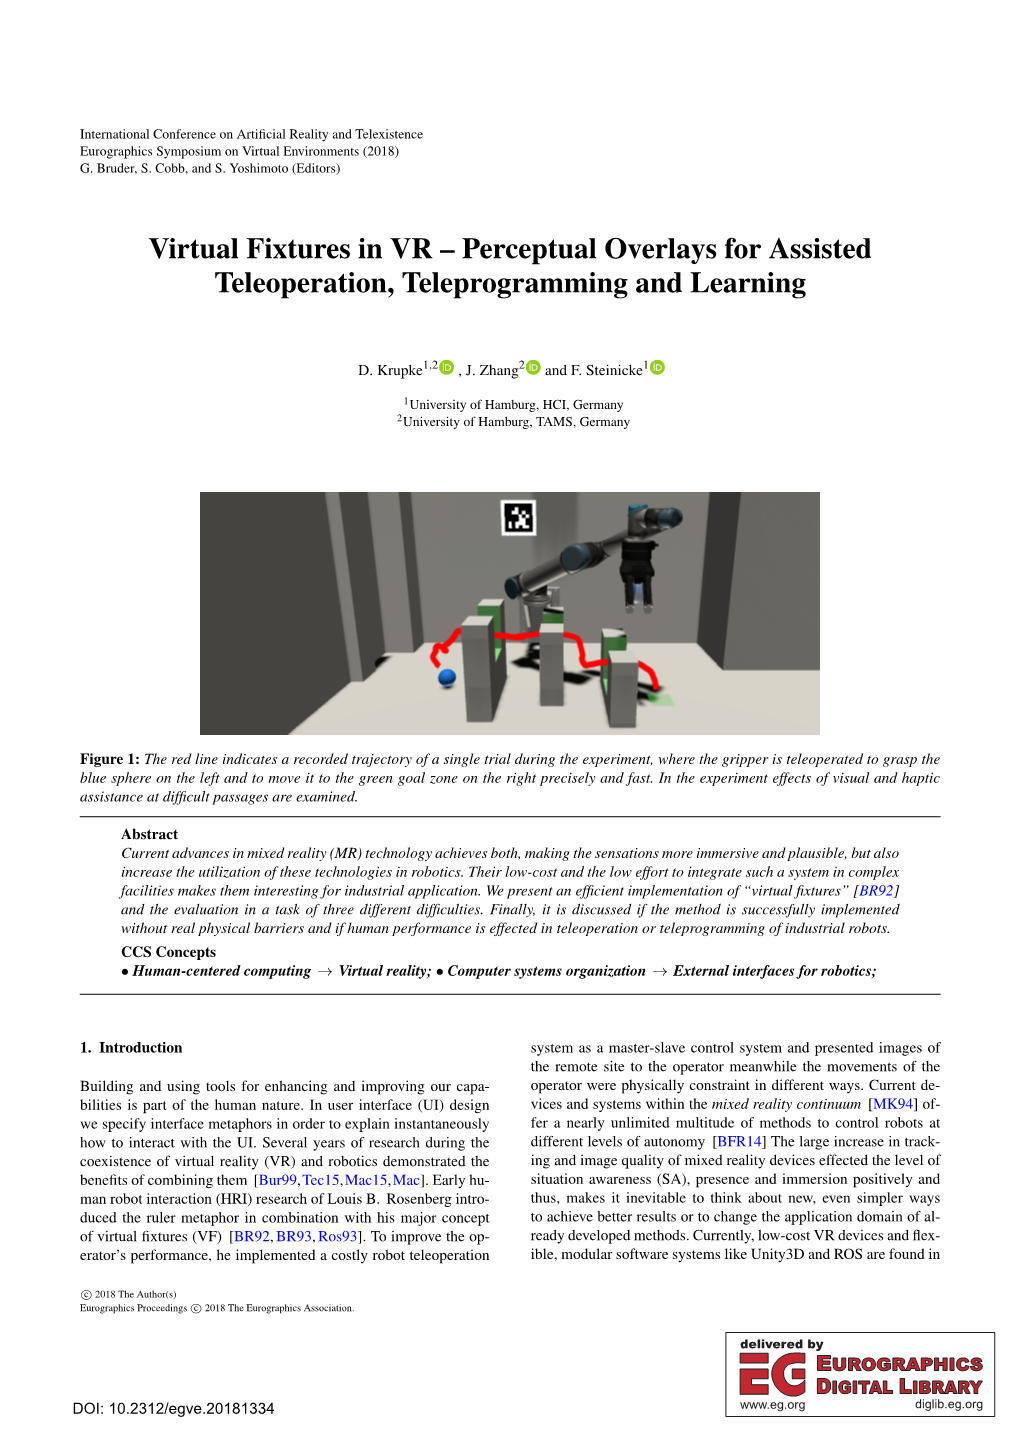 Virtual Fixtures in VR – Perceptual Overlays for Assisted Teleoperation, Teleprogramming and Learning